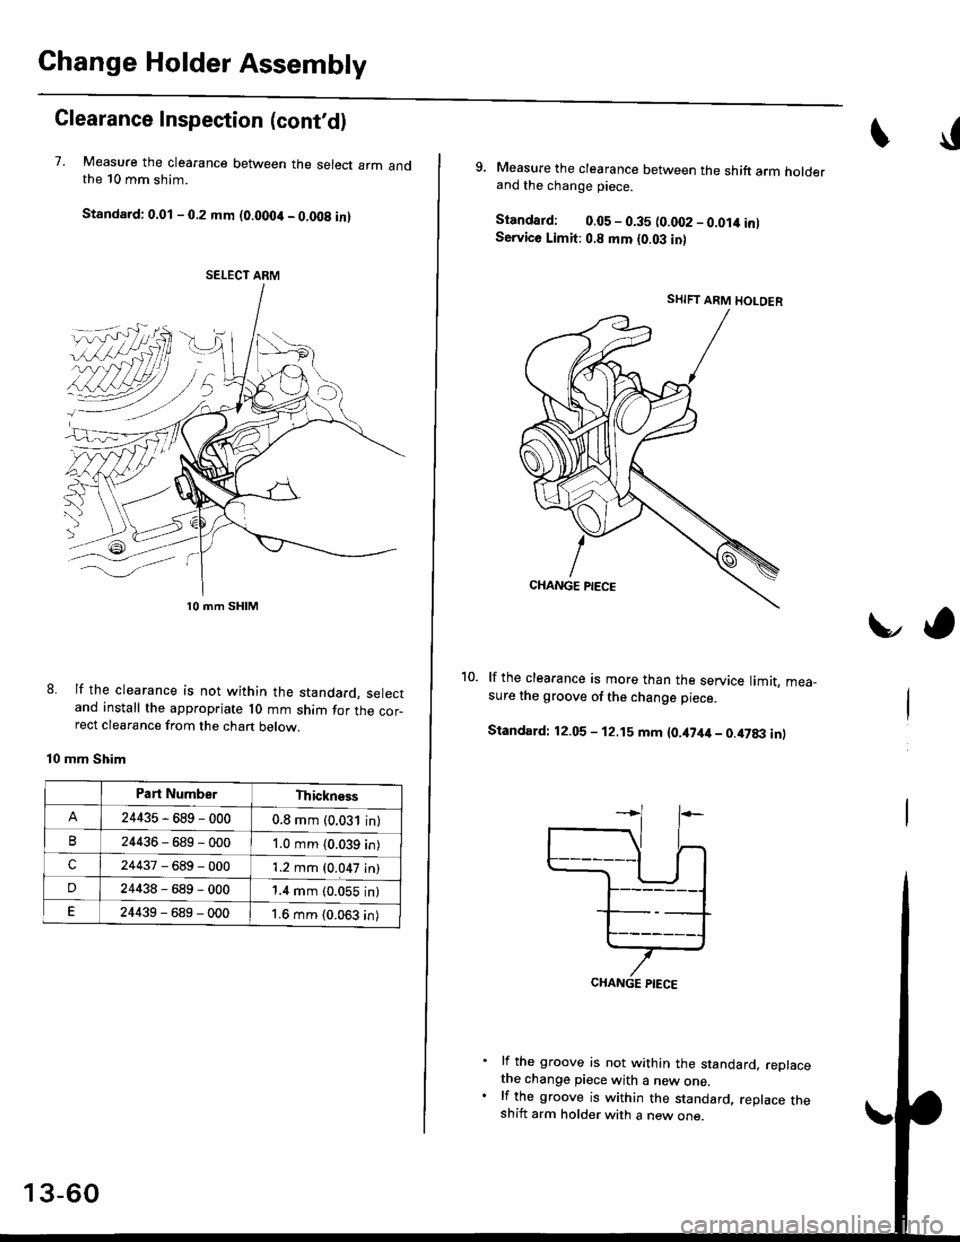 HONDA CIVIC 1997 6.G Workshop Manual Change Holder Assembly
Clearance Inspection (contd)
7. Measure the clearance between the select arm andthe 10 mm shim.
Standard: 0.01 - 0.2 mm (0.0004 - 0.008 in)
lf the clearance is not within the s